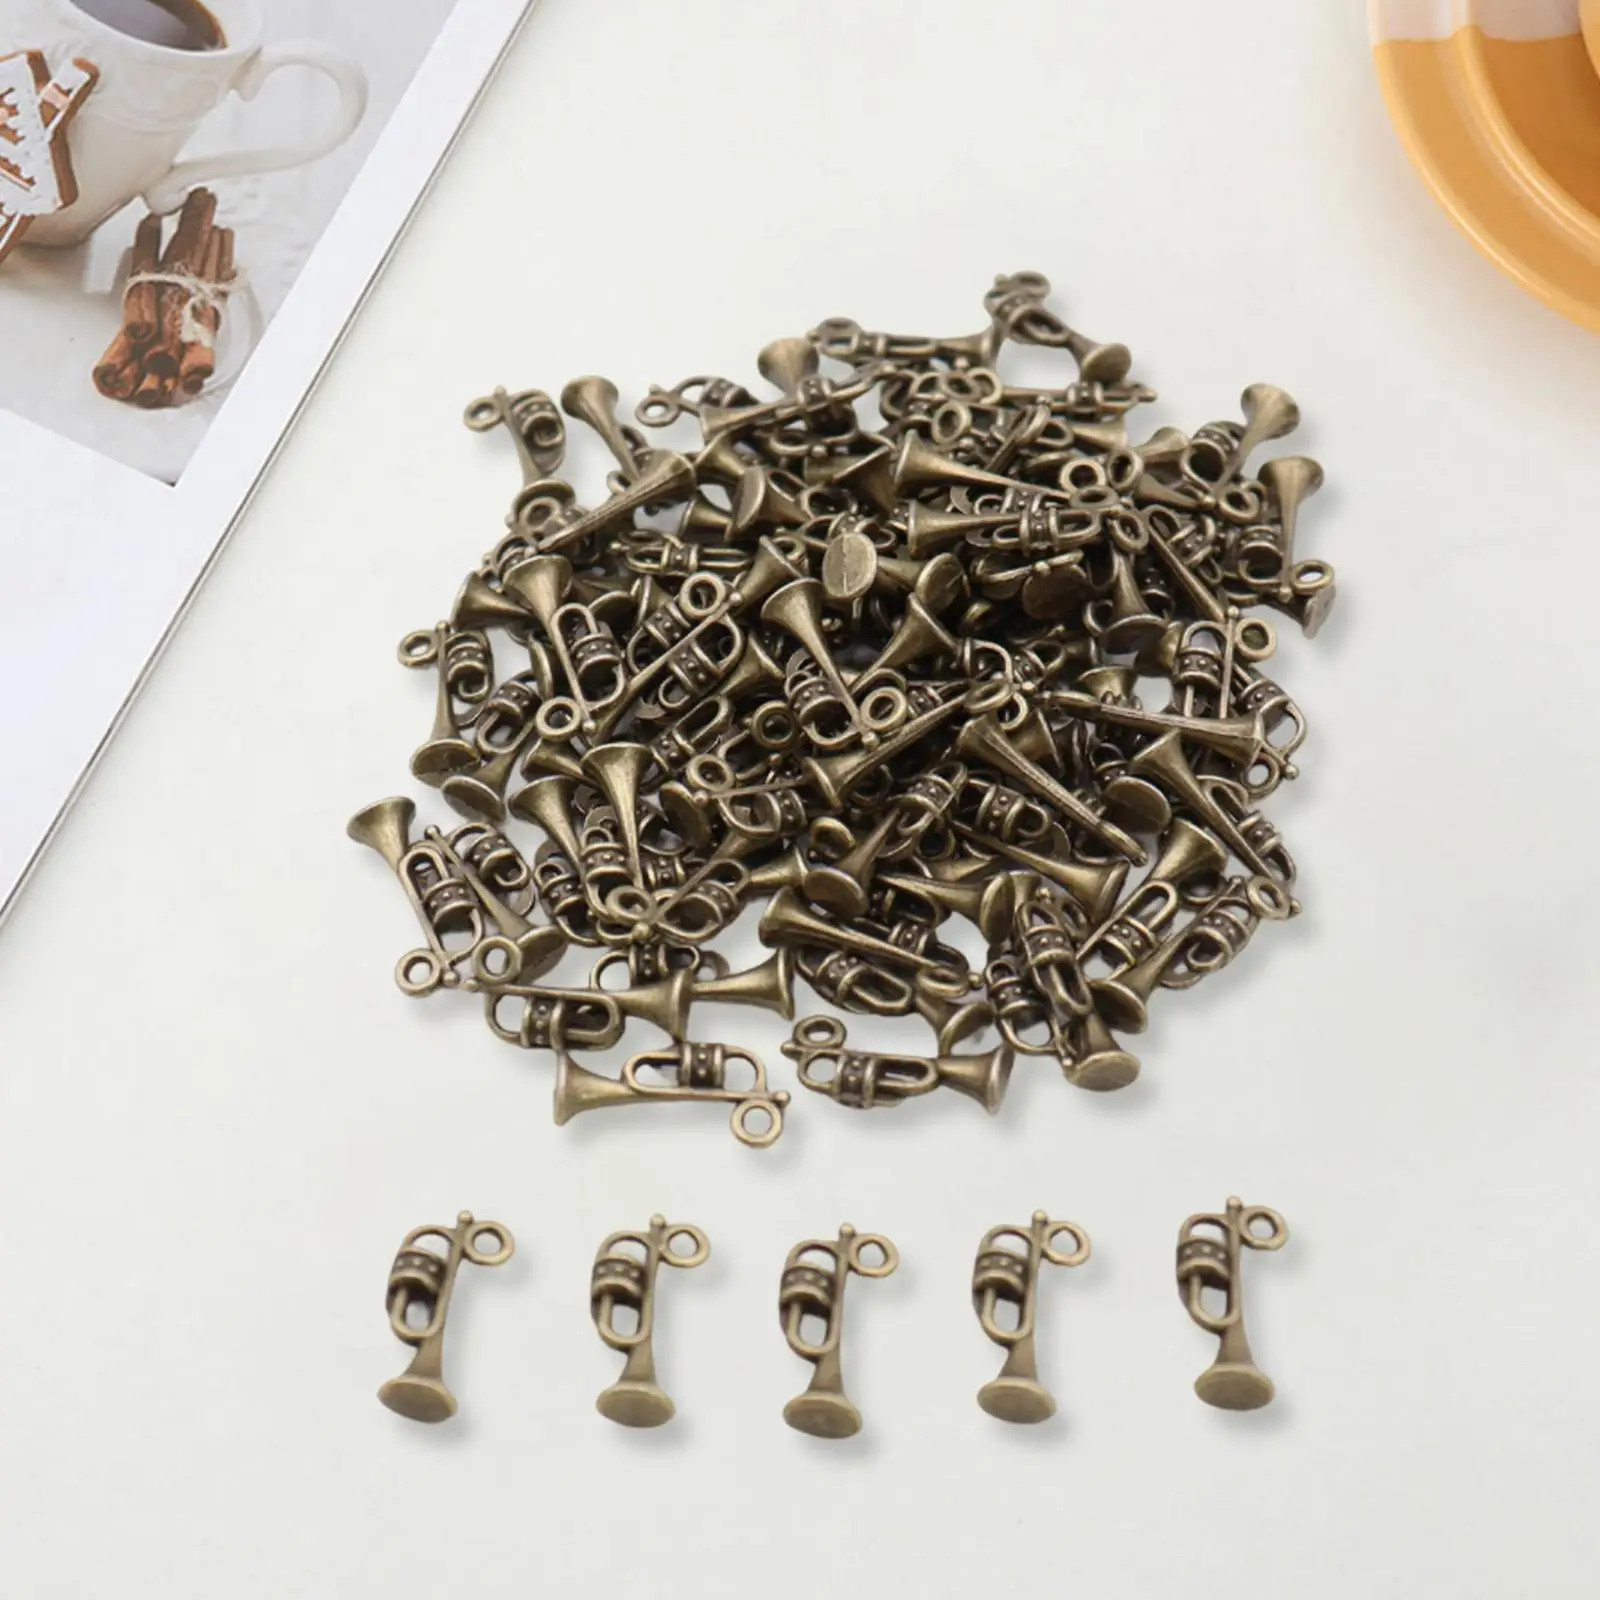 100x Metal Pendant Beads Key Charms Charms Pendants Trumpet Music Pendants for Bracelet Earring Necklace Jewelry Making